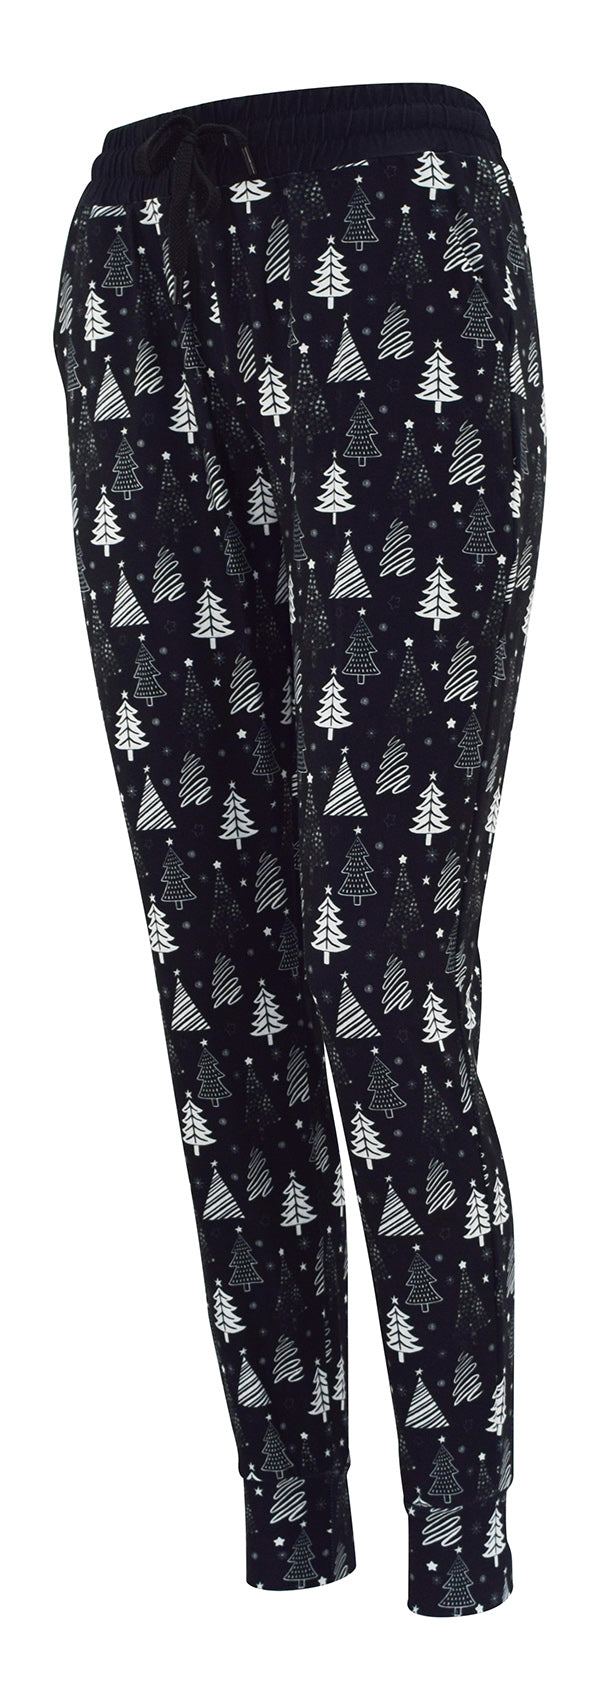 Festive Forest Lejoggers-Joggers